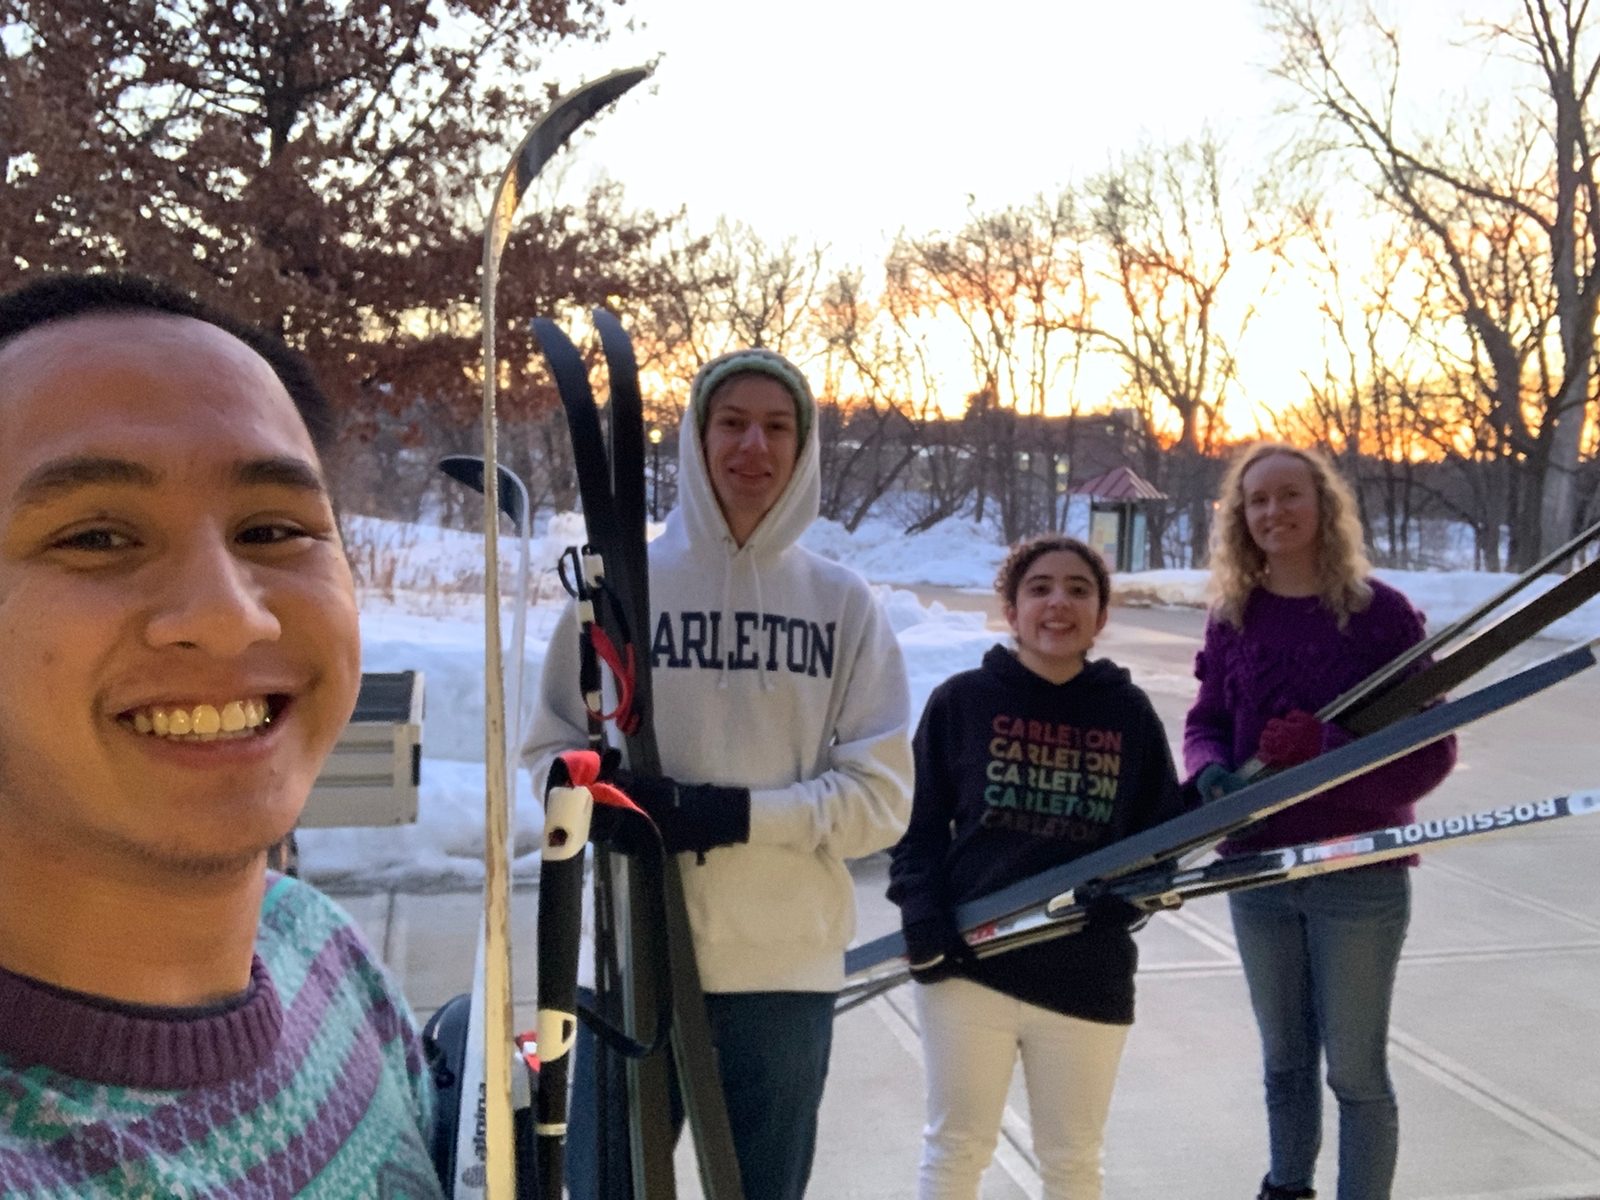 Selfie. Students hold their cross-country skiing equipement while the sun sets on the background.